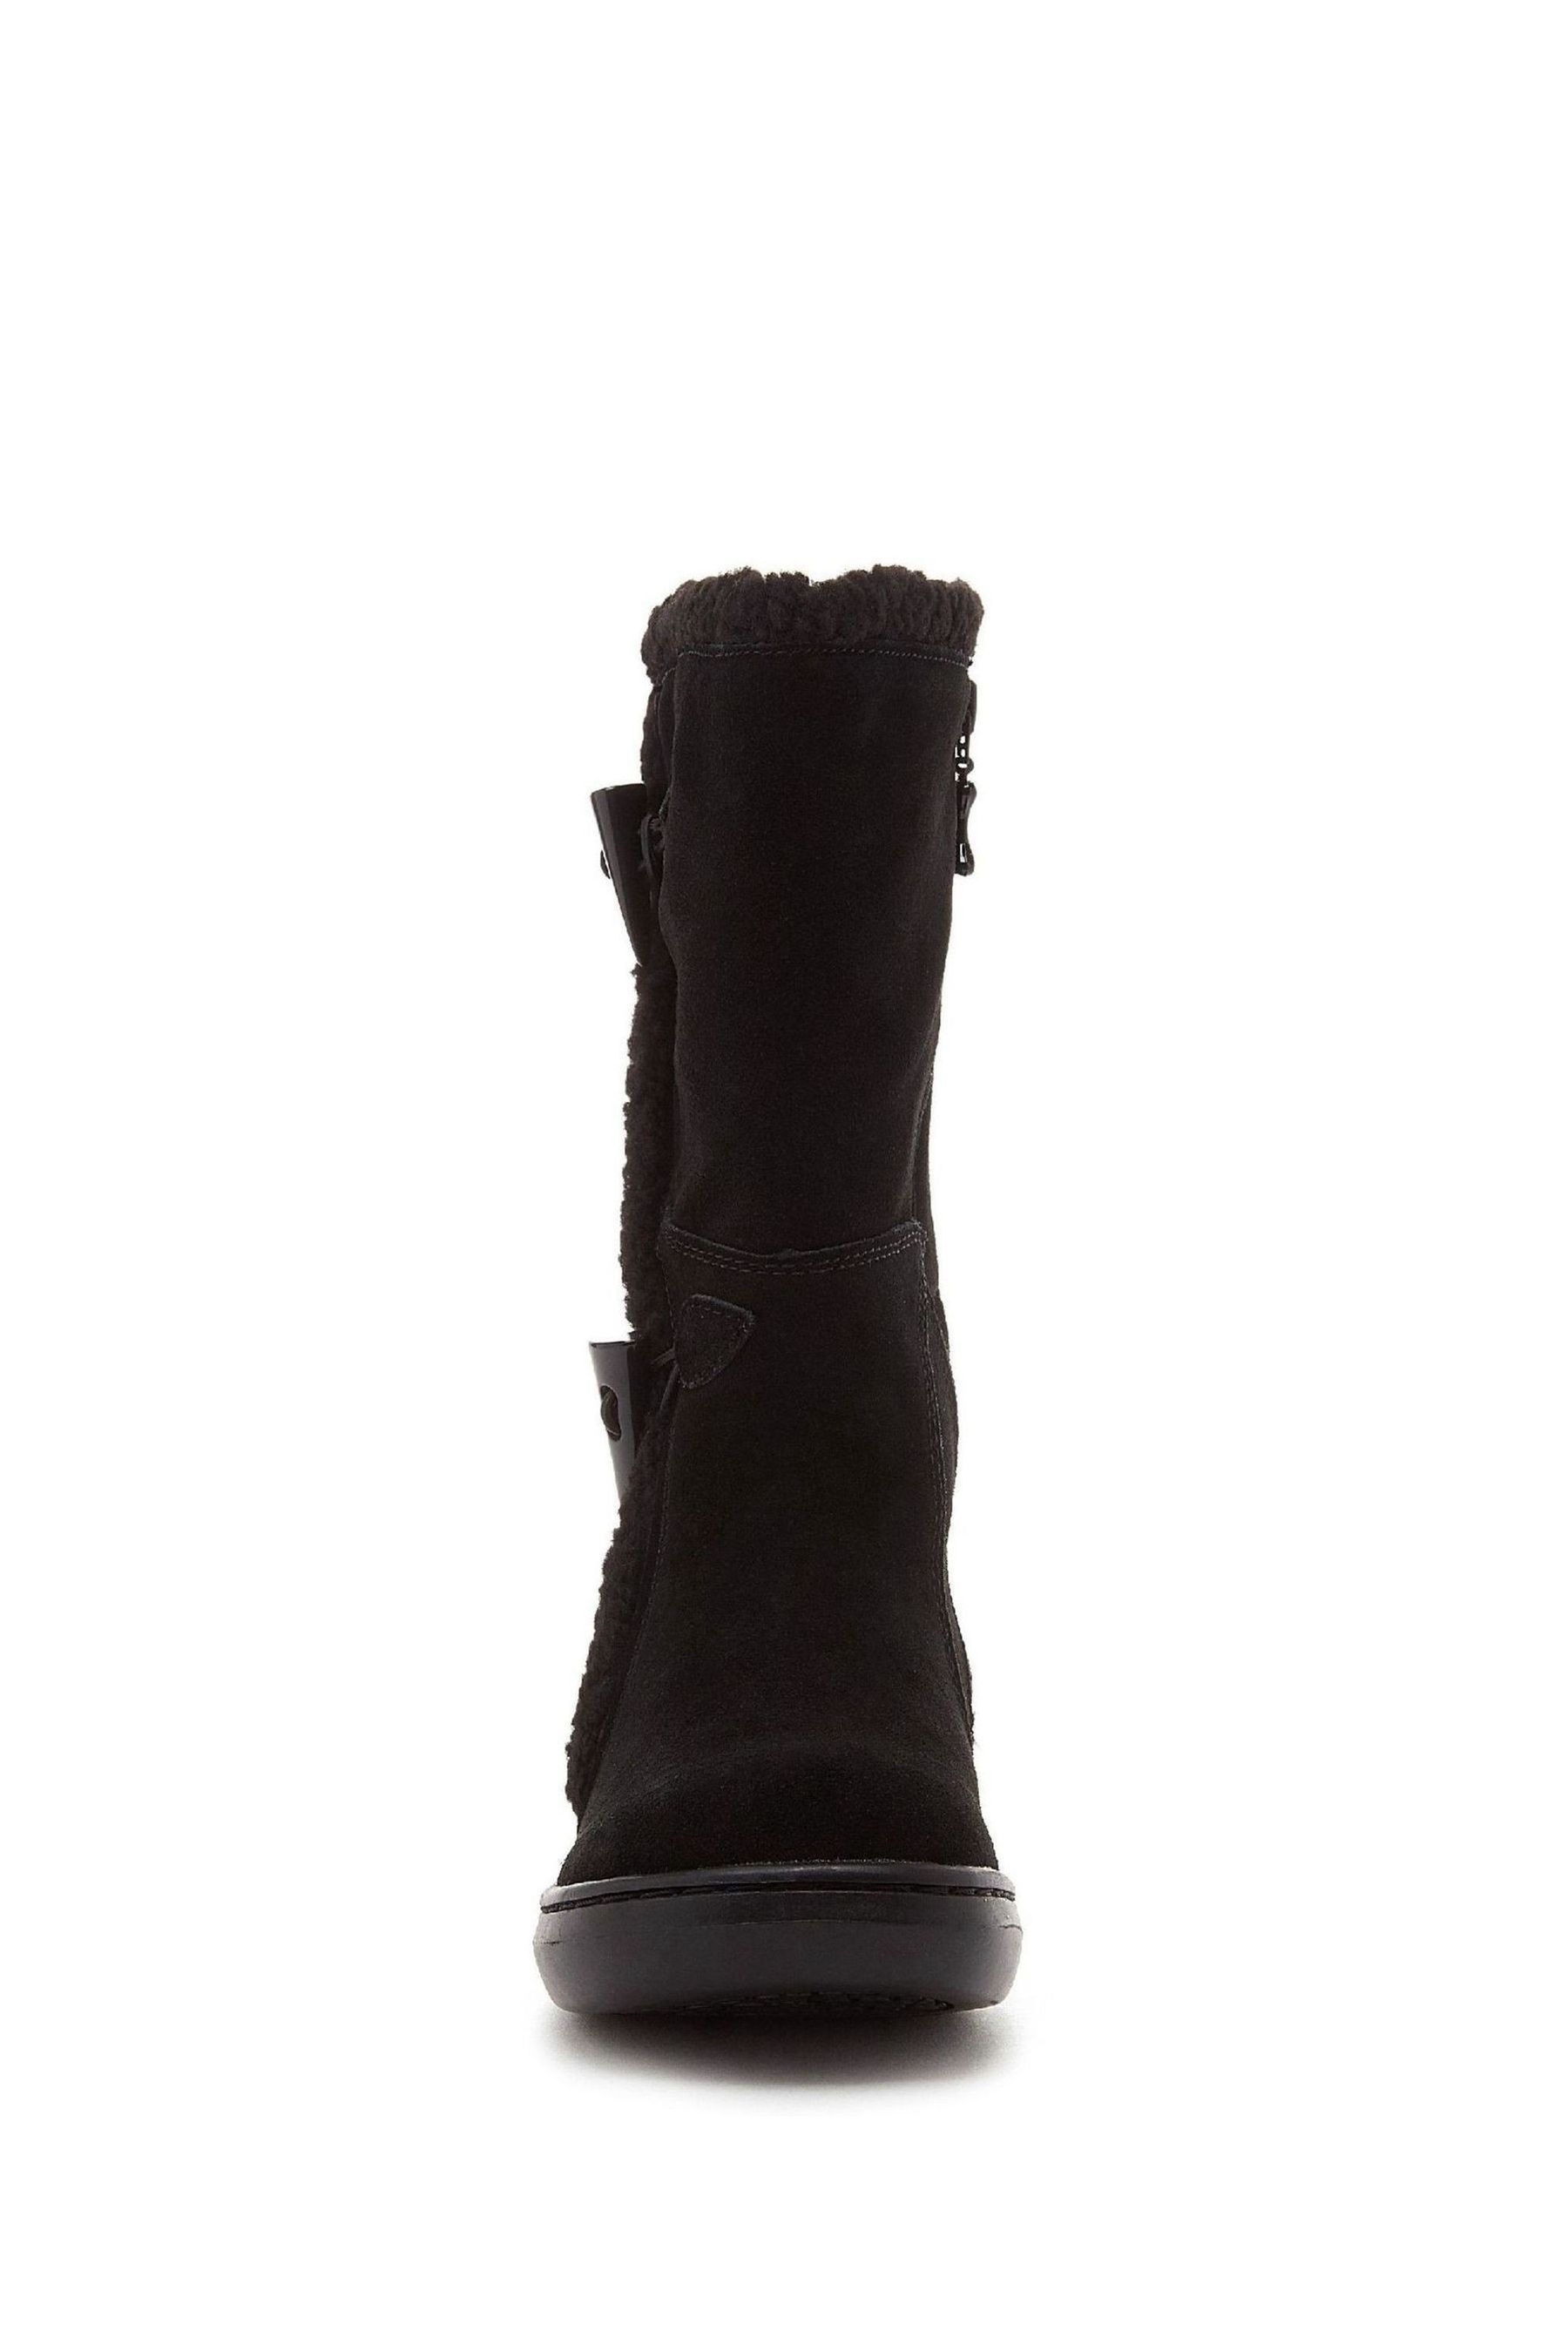 Buy Rocket Dog Slope Mid Calf Winter Boots from the Next UK online shop